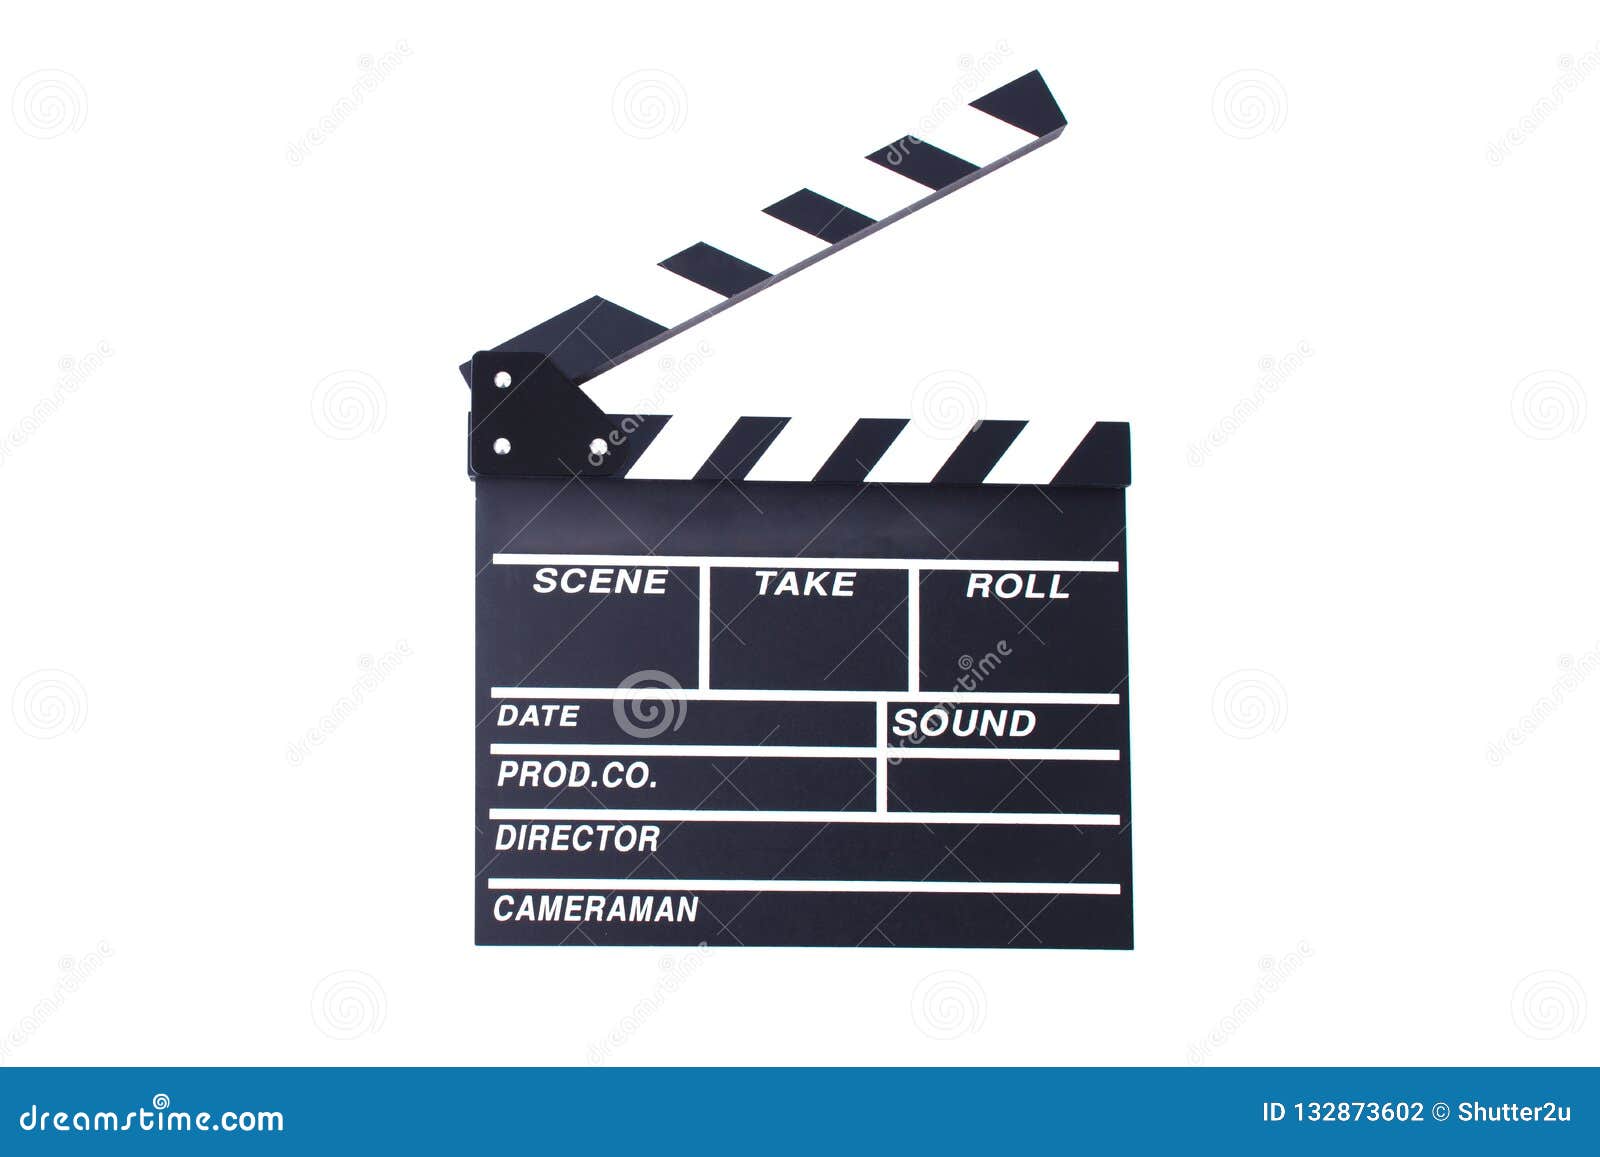 clapperboard or slate for director cut scene in action movie for